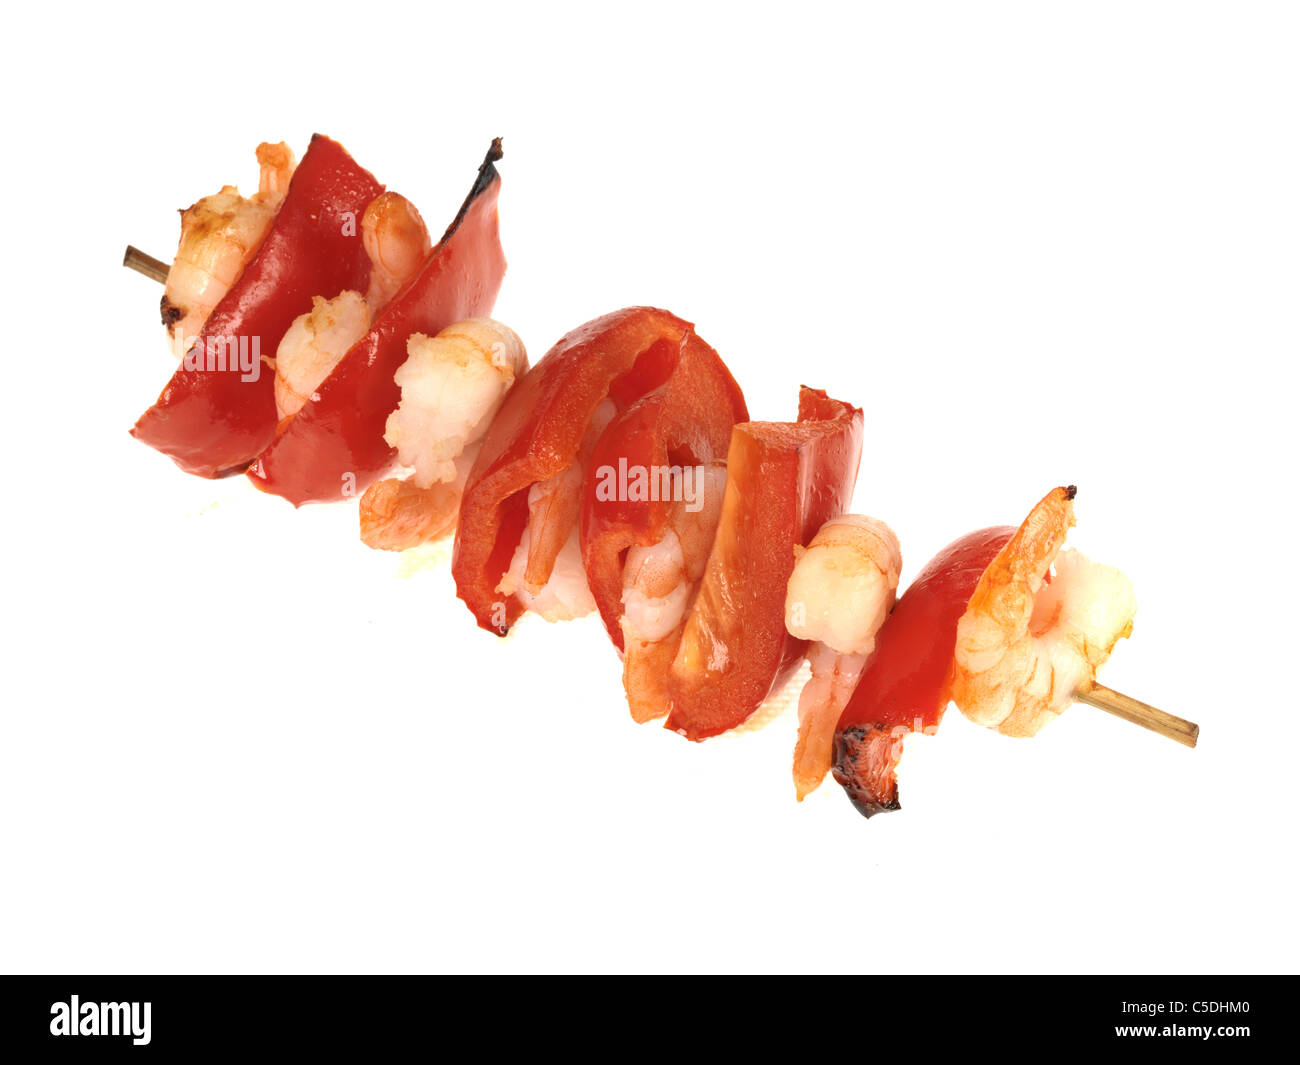 King prawn and pepper kebab Banque D'Images